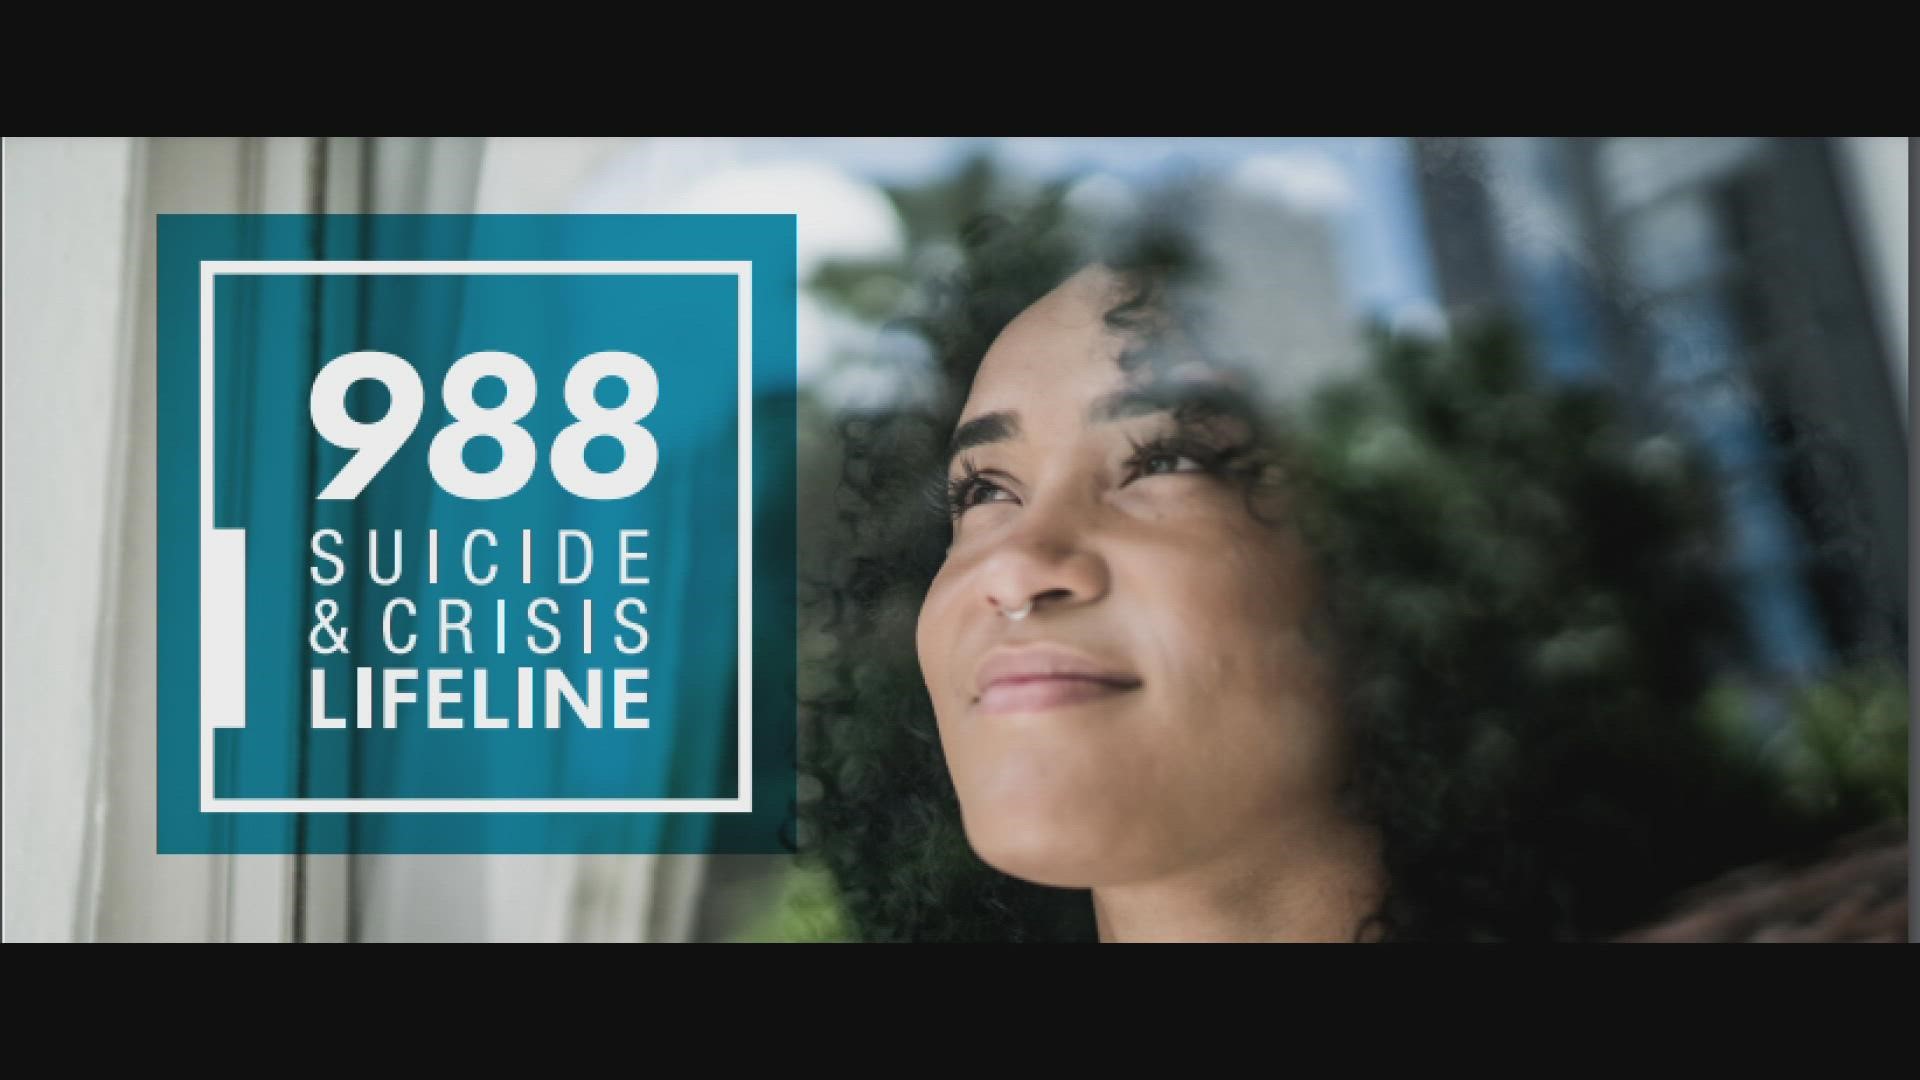 Instead of a dispatcher sending police or paramedics, dialing 988 will connect people who call or text with trained mental health counselors.